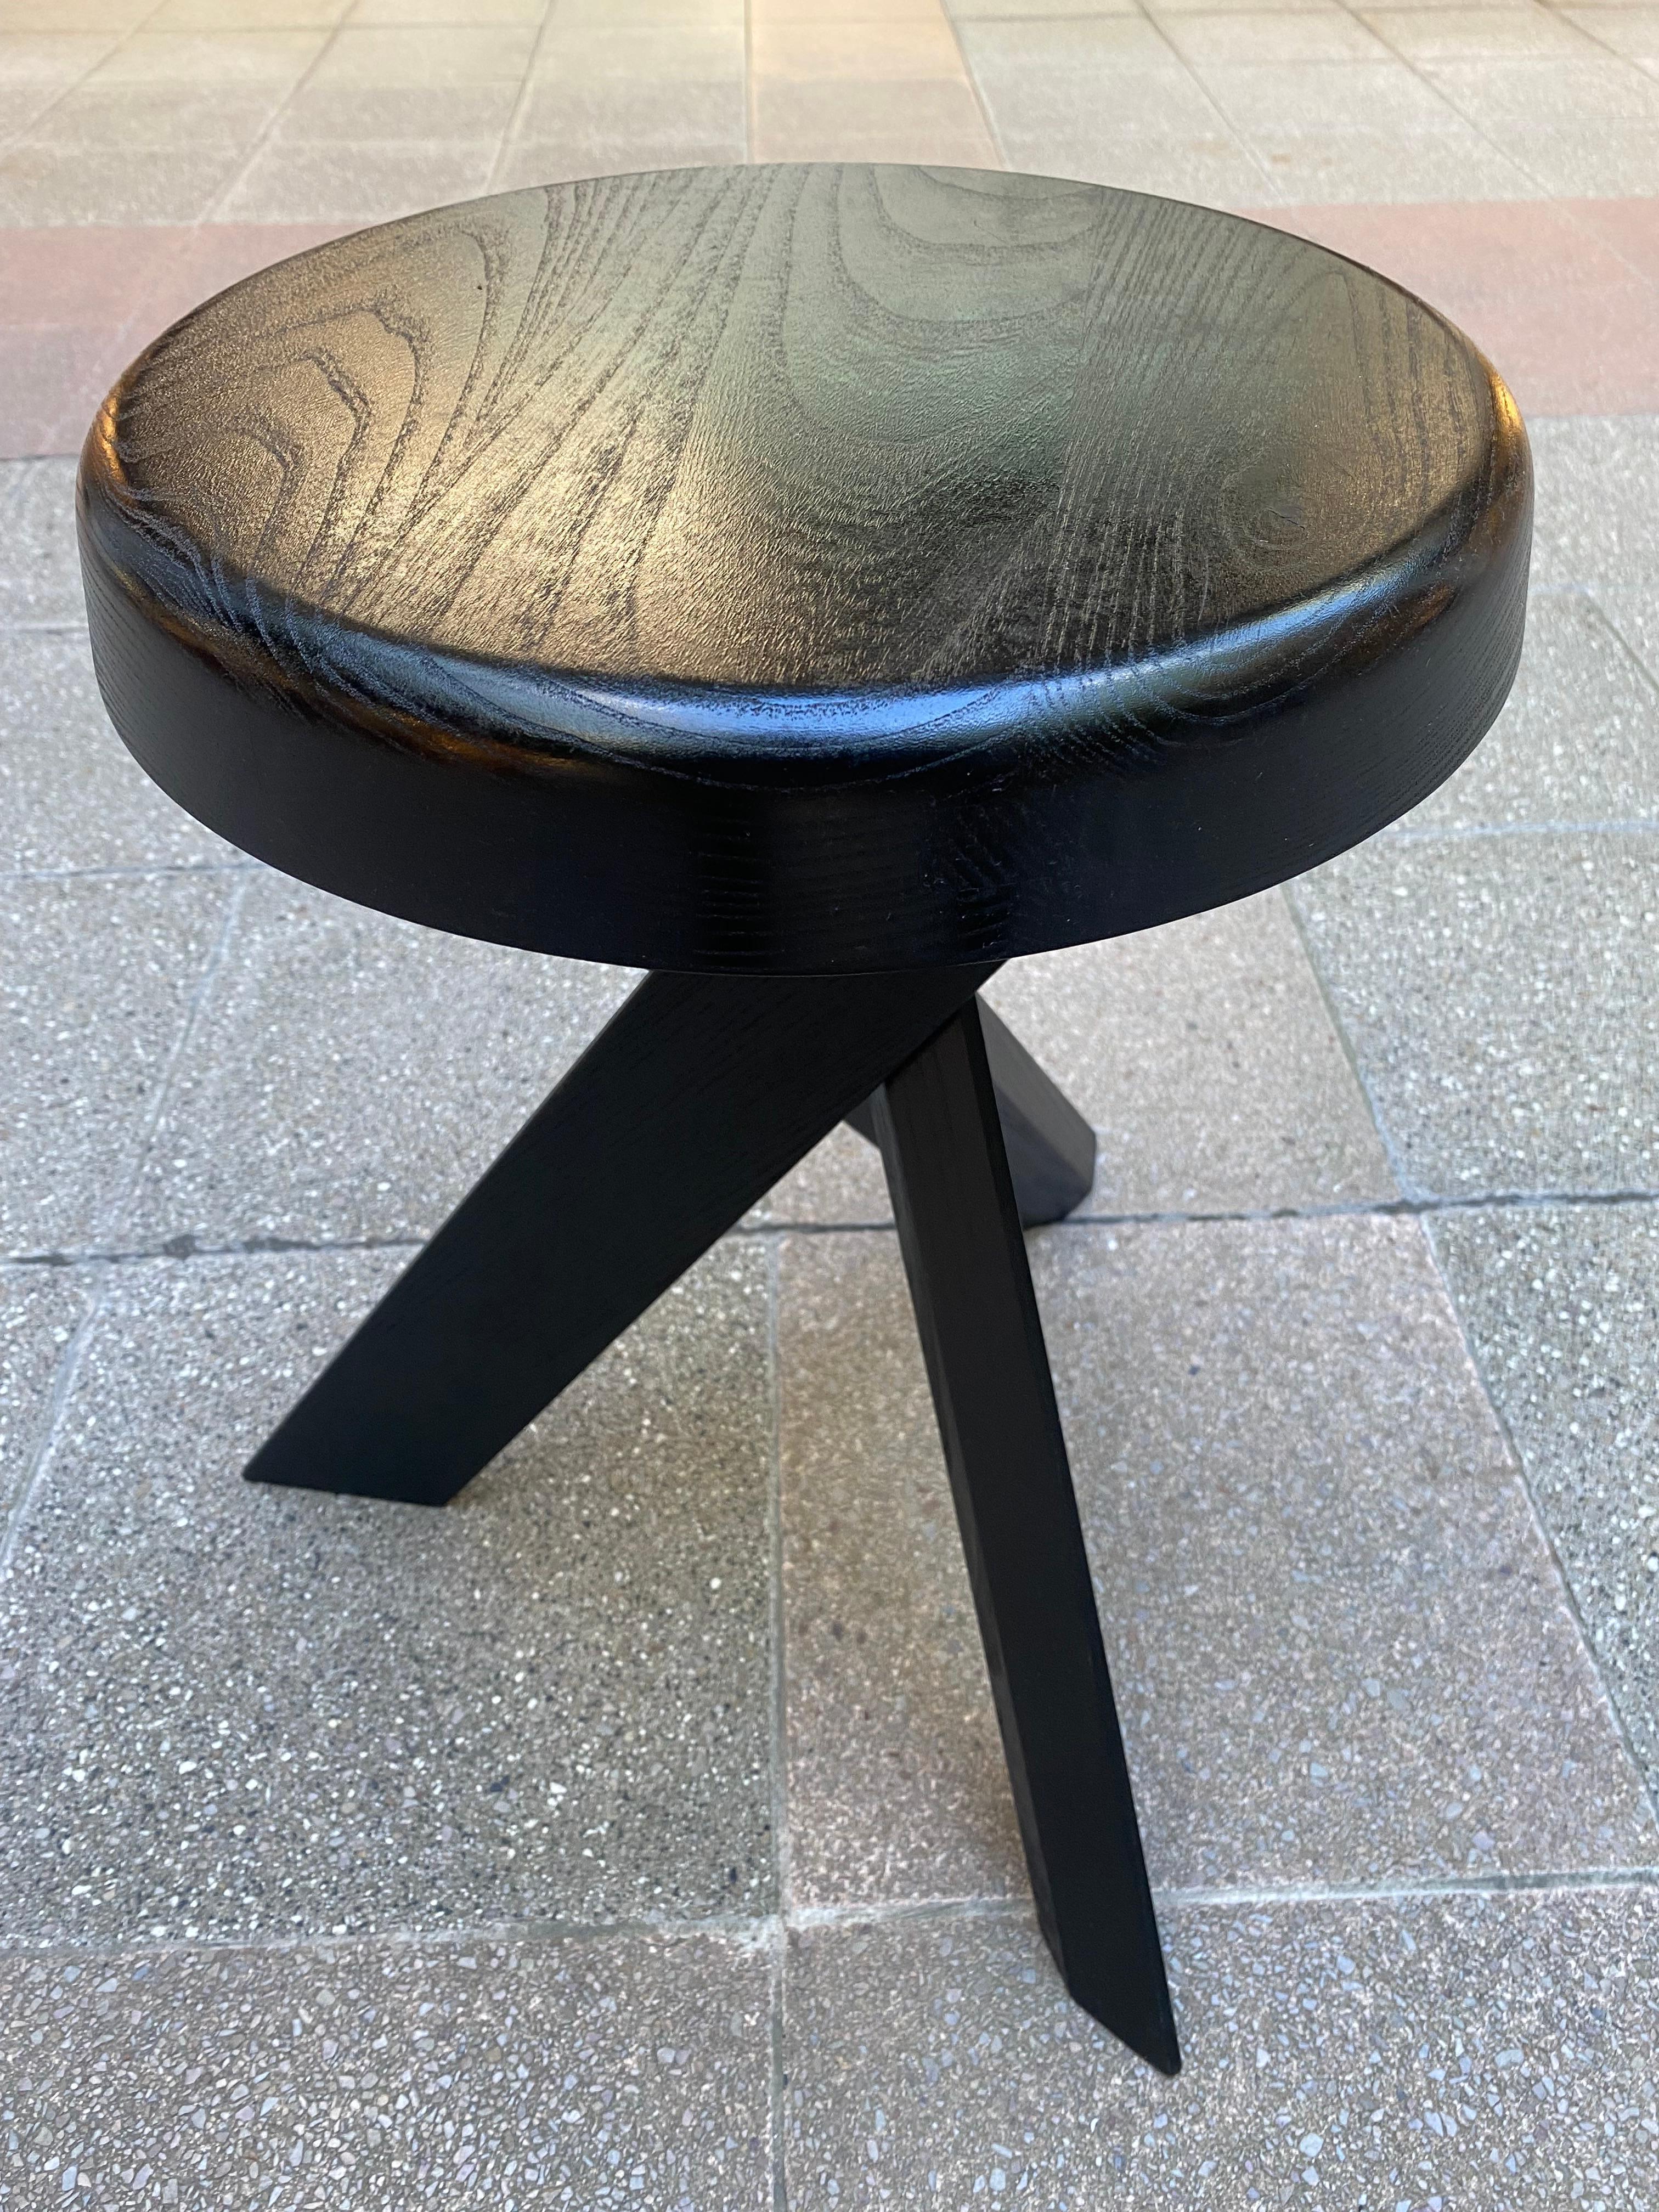 Pierre Chapo
S31A black edition stool
Rare
Black lacquered elm
H 45 x diam 33 cm
1400 euros each
2 available
Very good condition